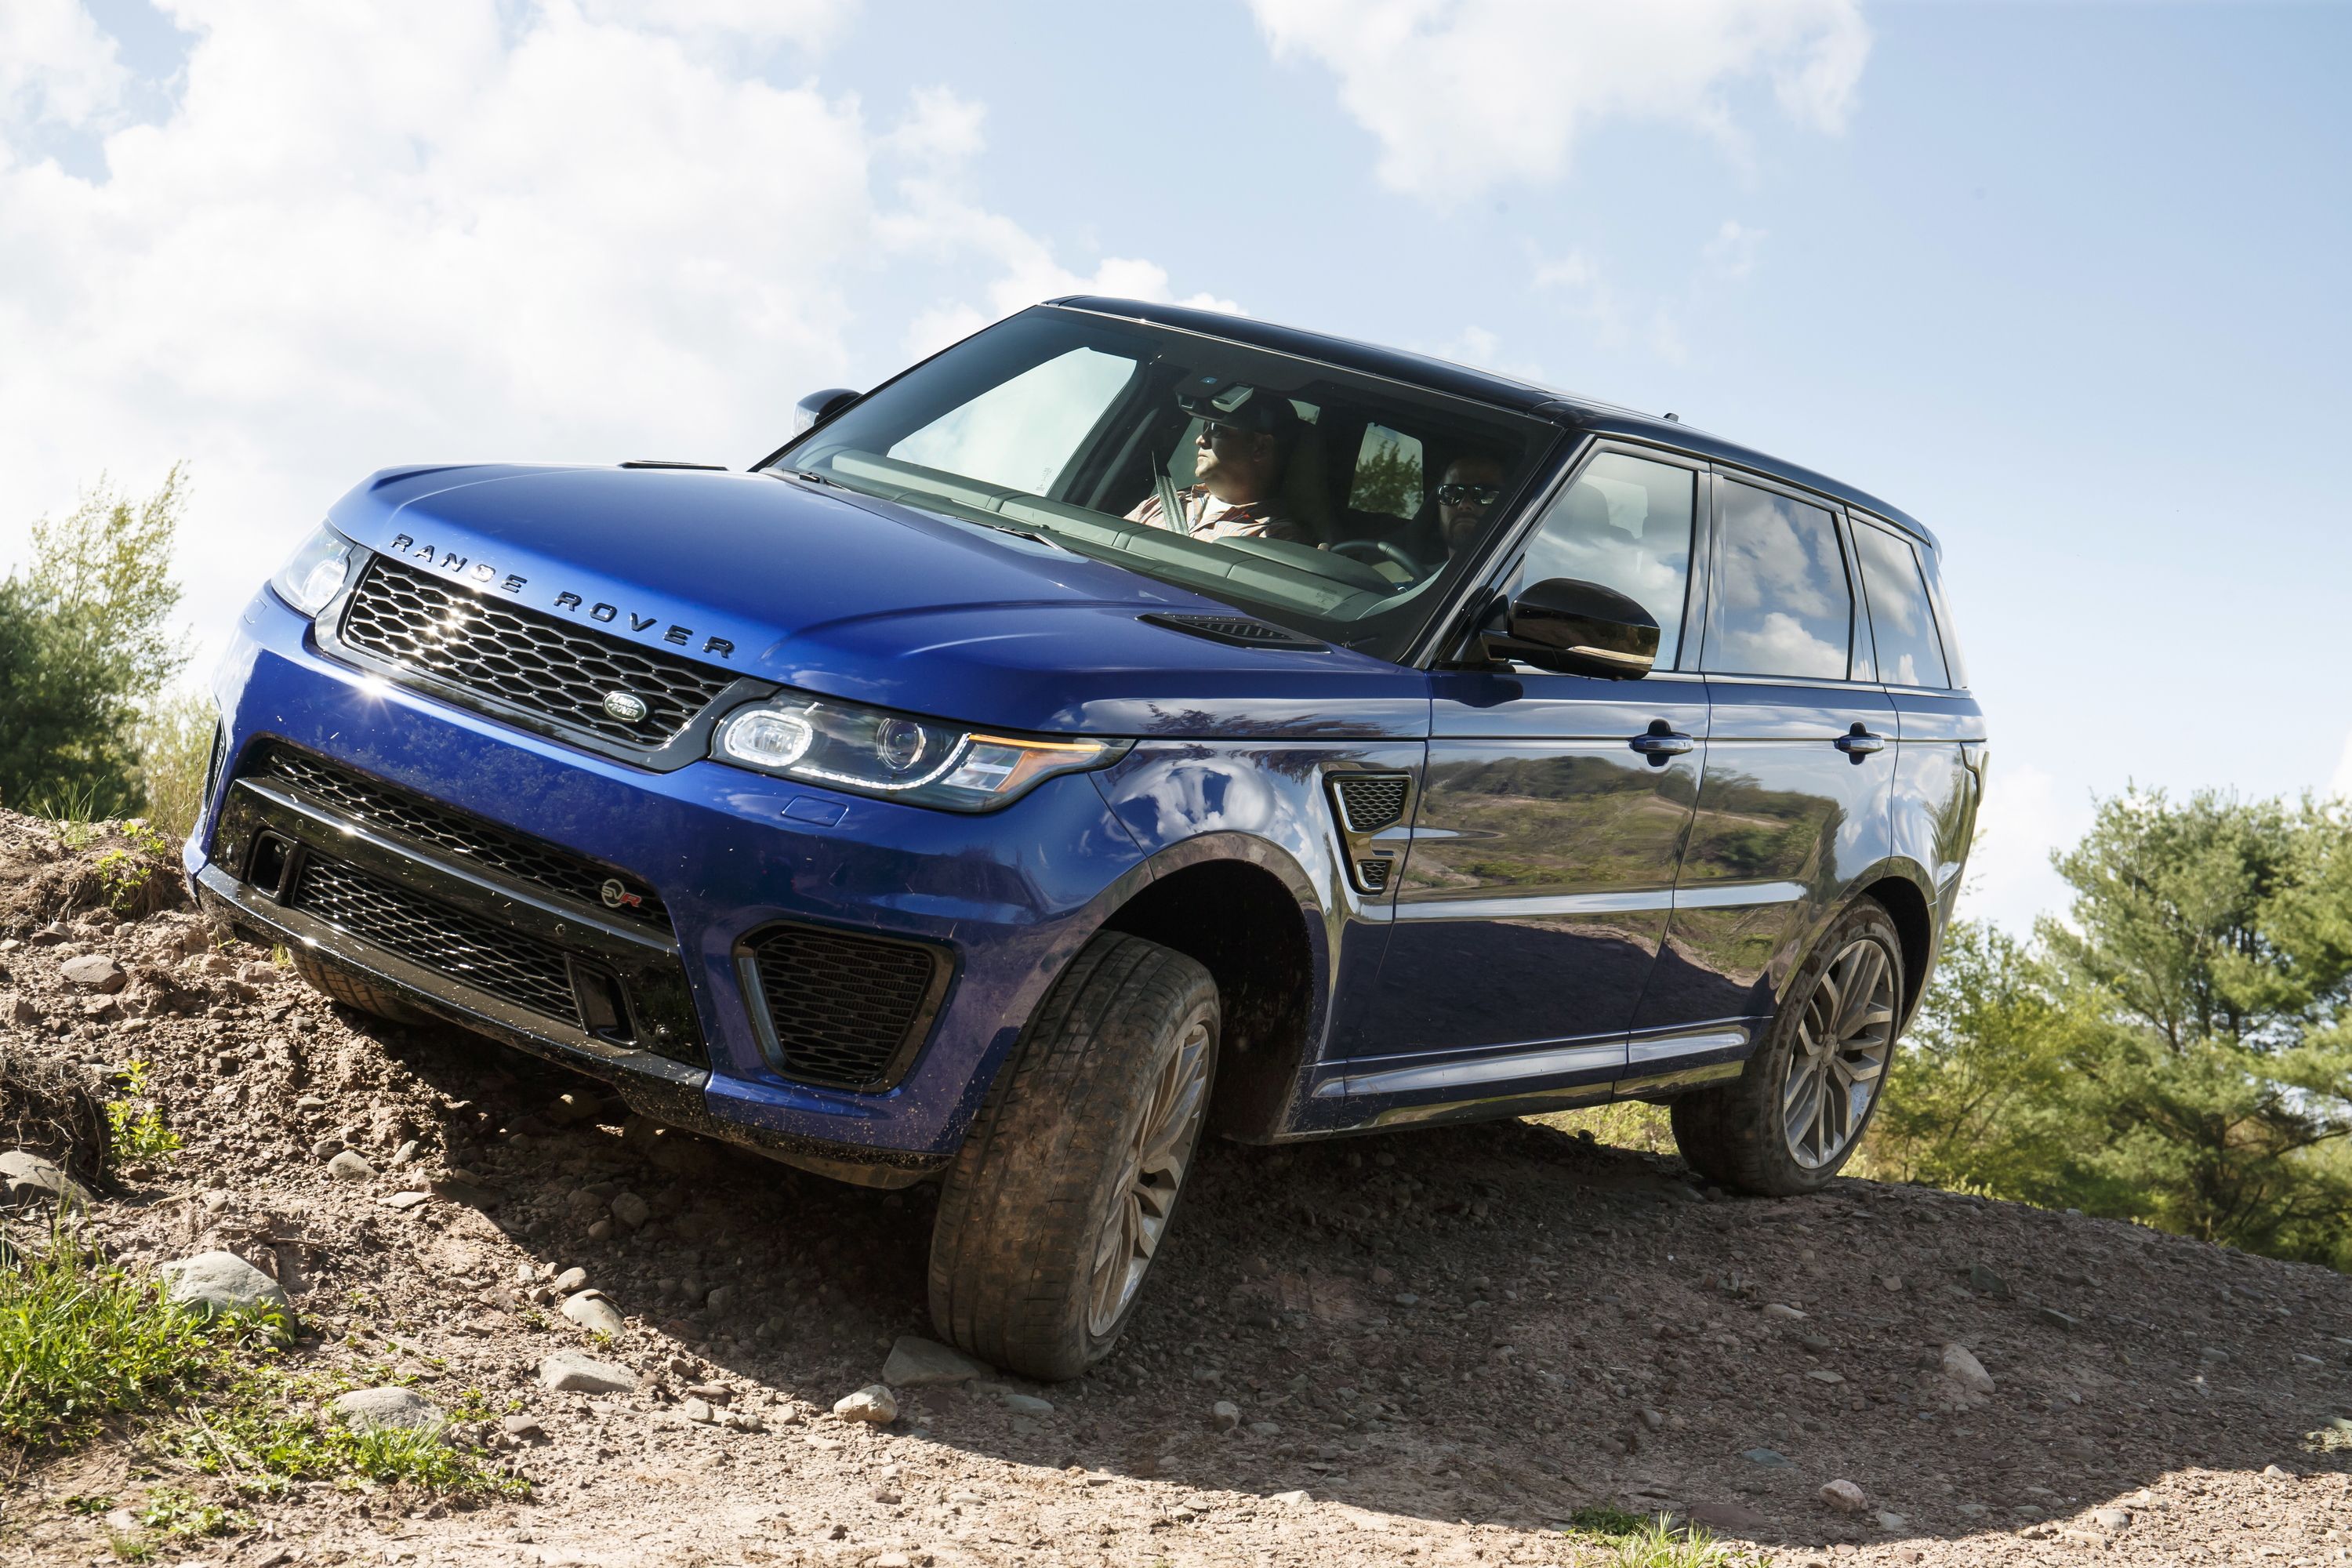 2015 Range Rover Sport SVR first drive: A true track-ready off-road machine